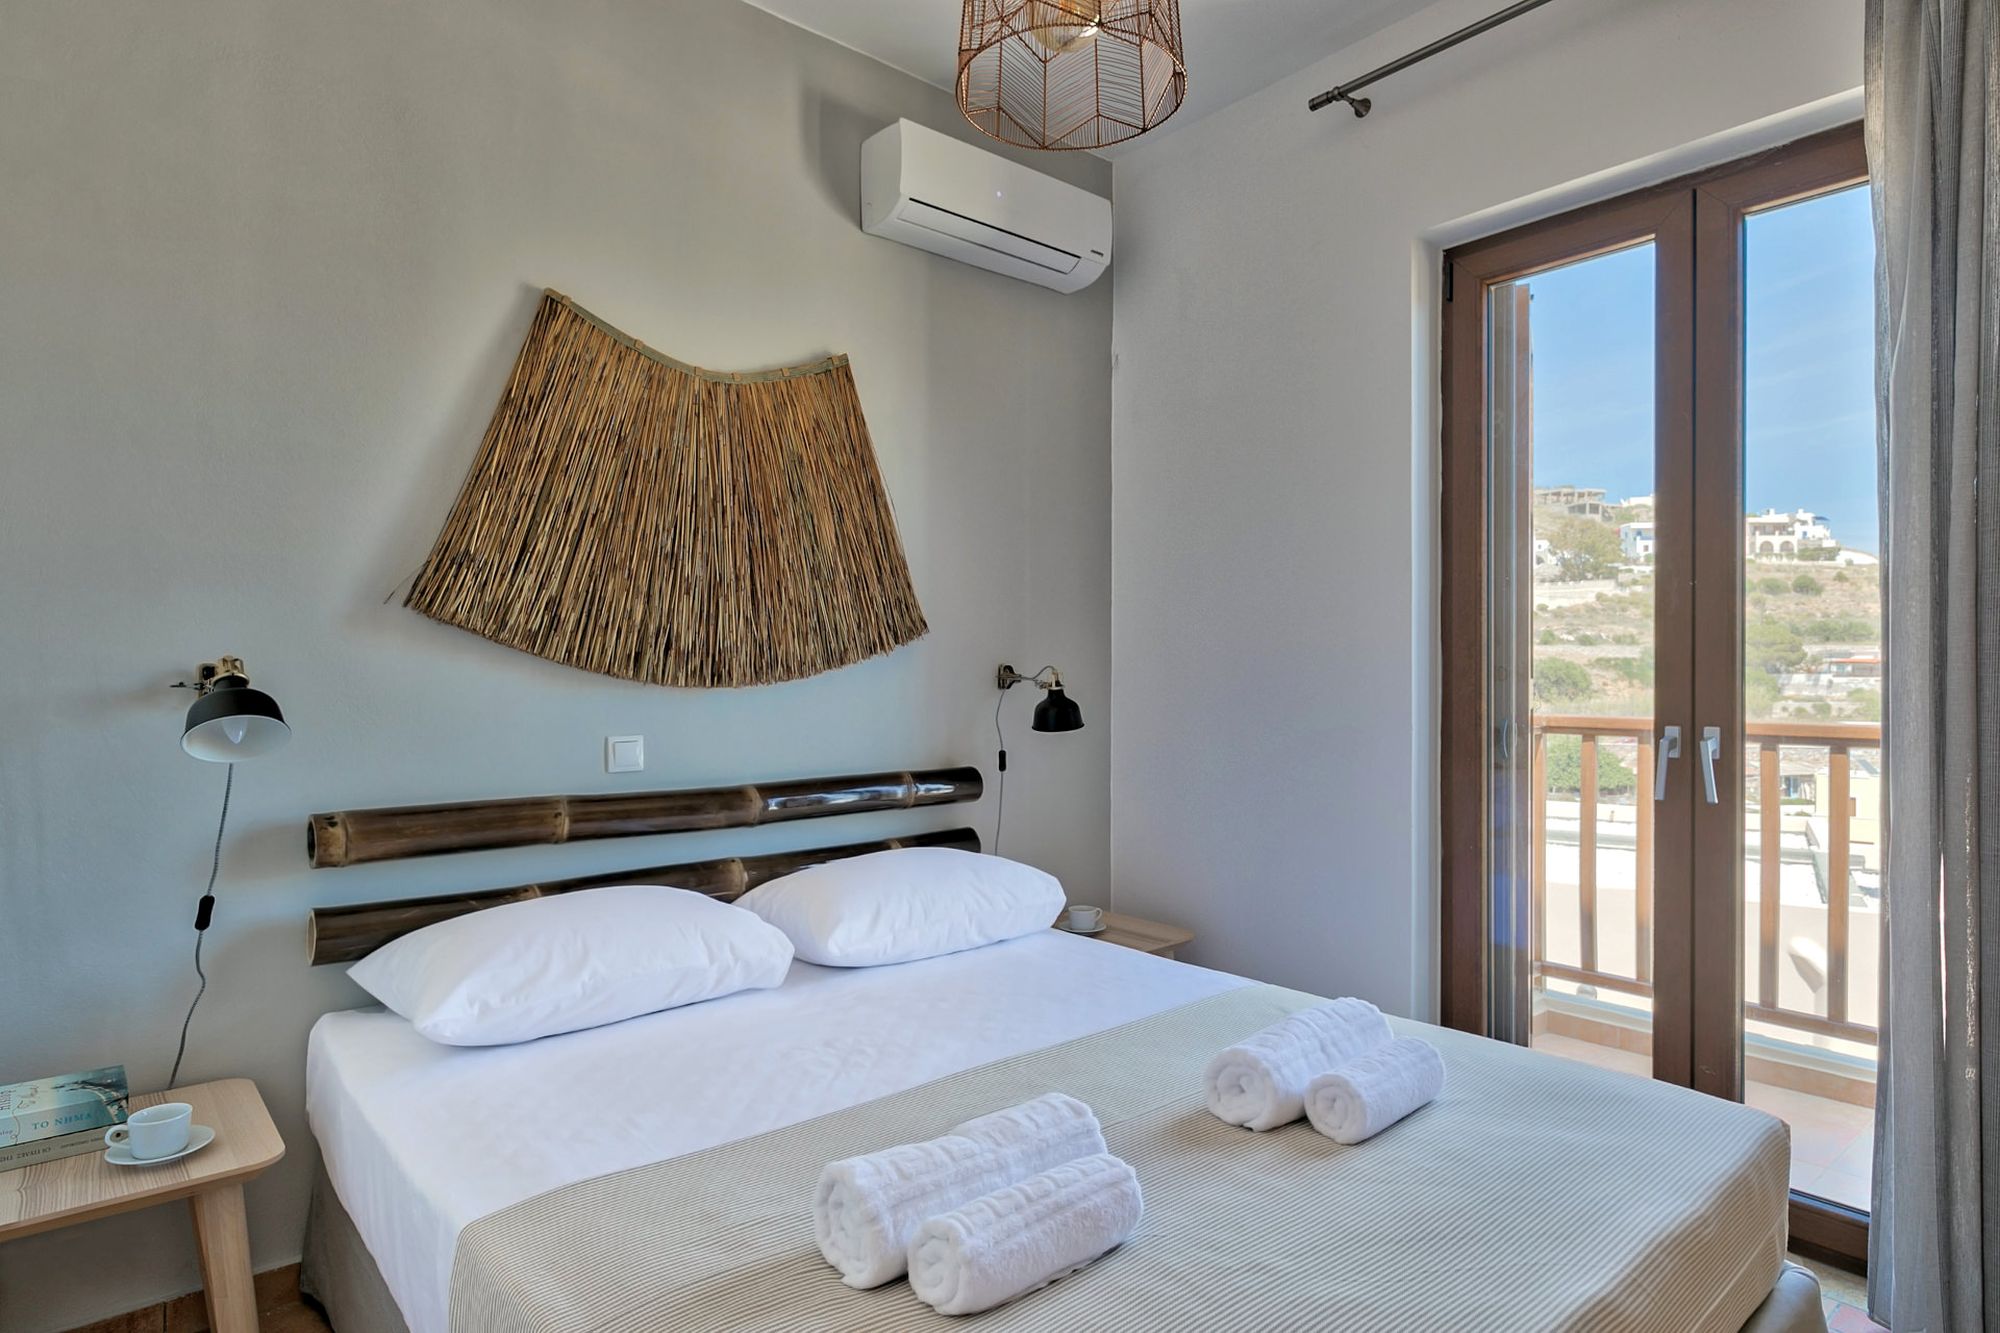 Air-conditioned bedroom with double bed, black wall lights, wooden bed side tables, a big wall wicker deco element and wooden bamboo masts over the bed.